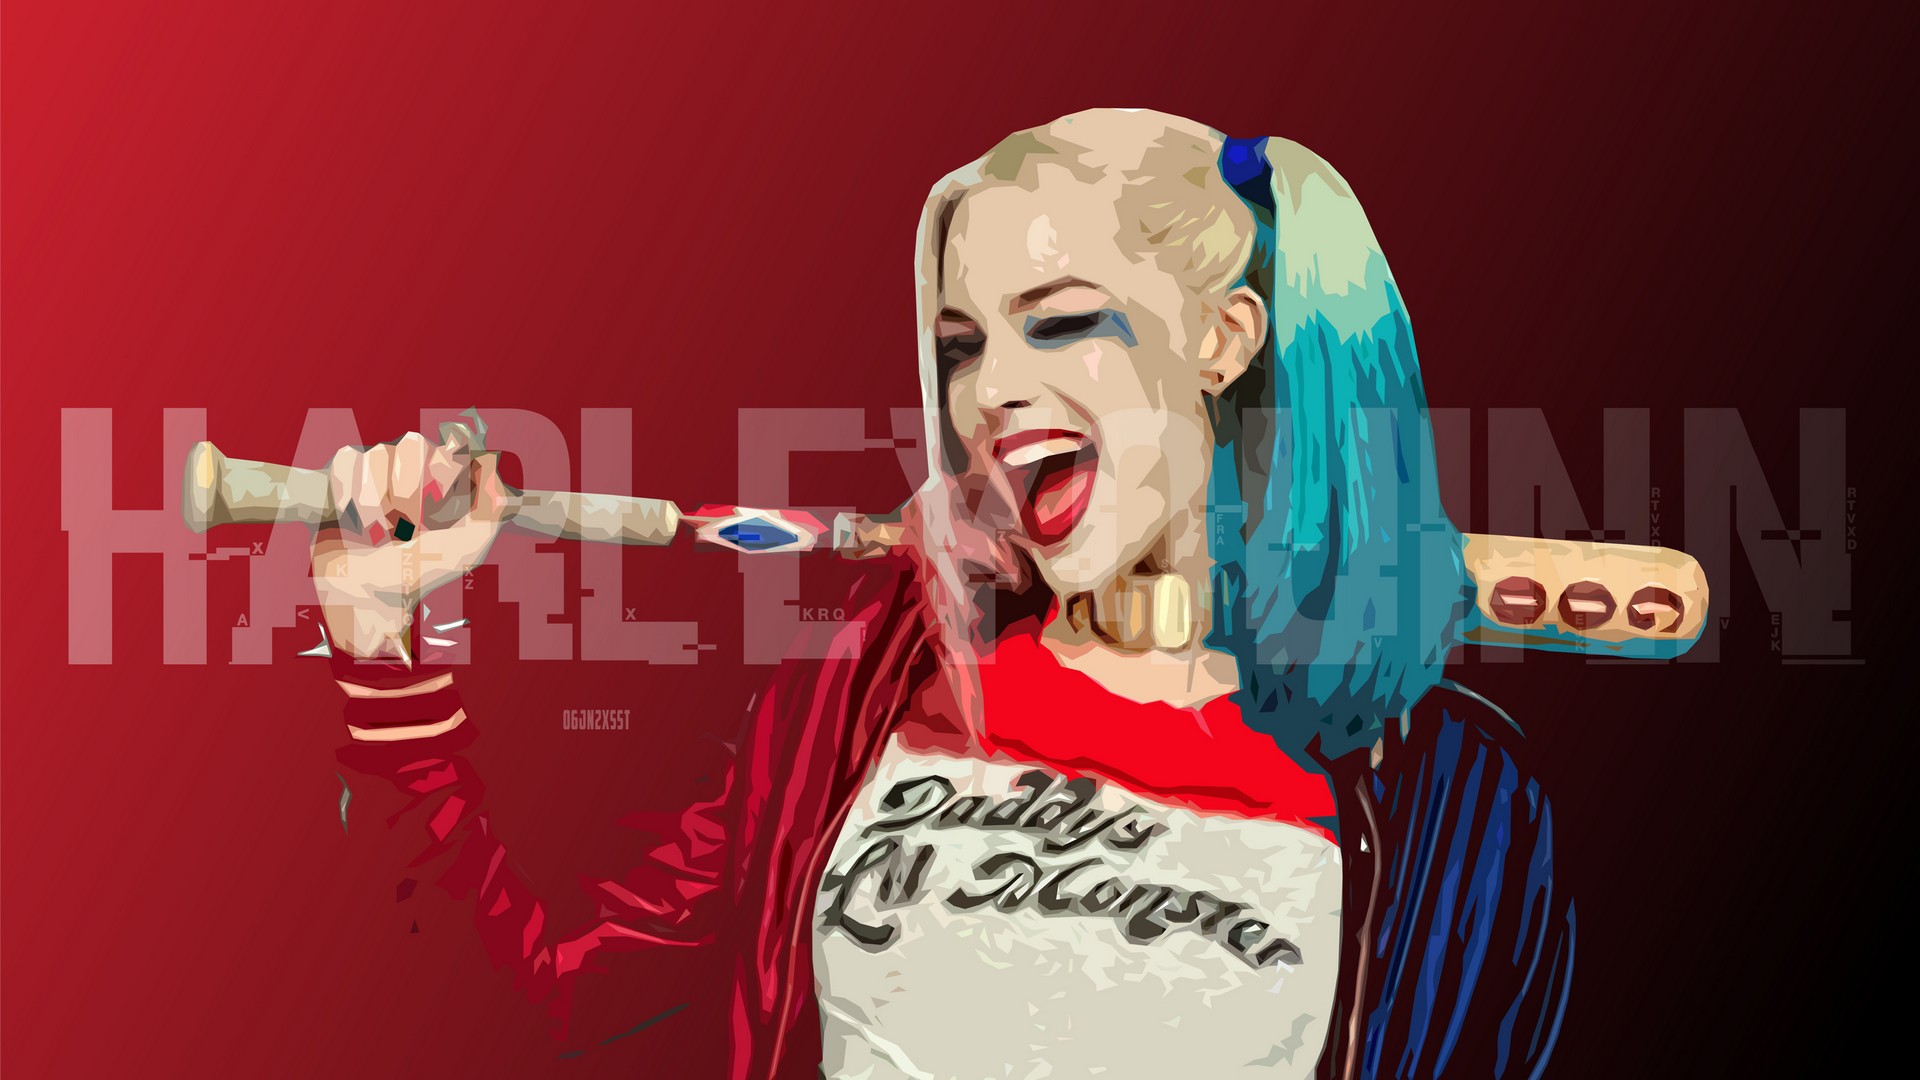 Wallpaper Harley Quinn Desktop with resolution 1920X1080 pixel. You can use this wallpaper as background for your desktop Computer Screensavers, Android or iPhone smartphones